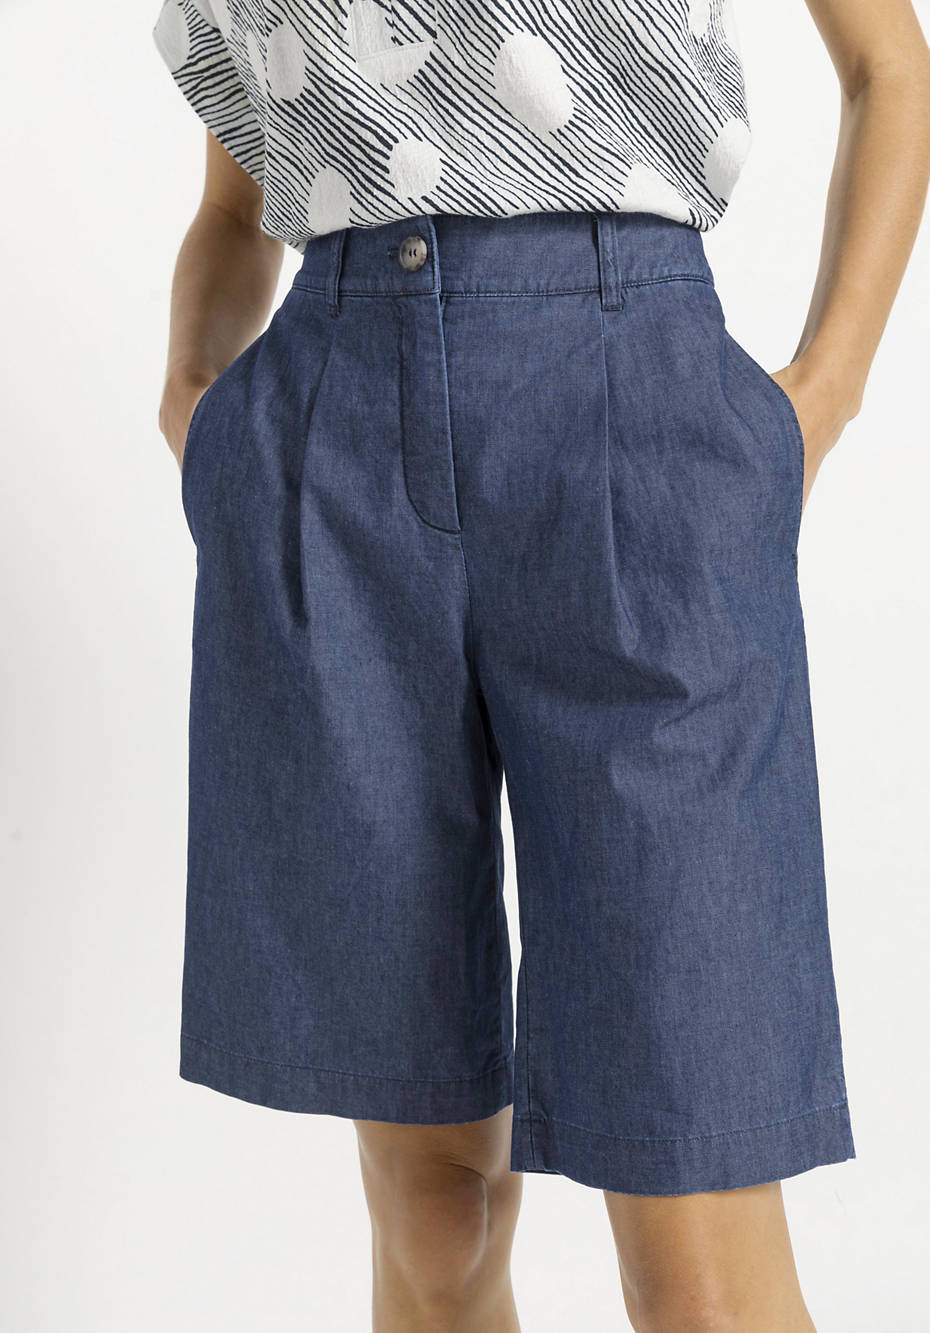 Denim shorts made from pure organic cotton